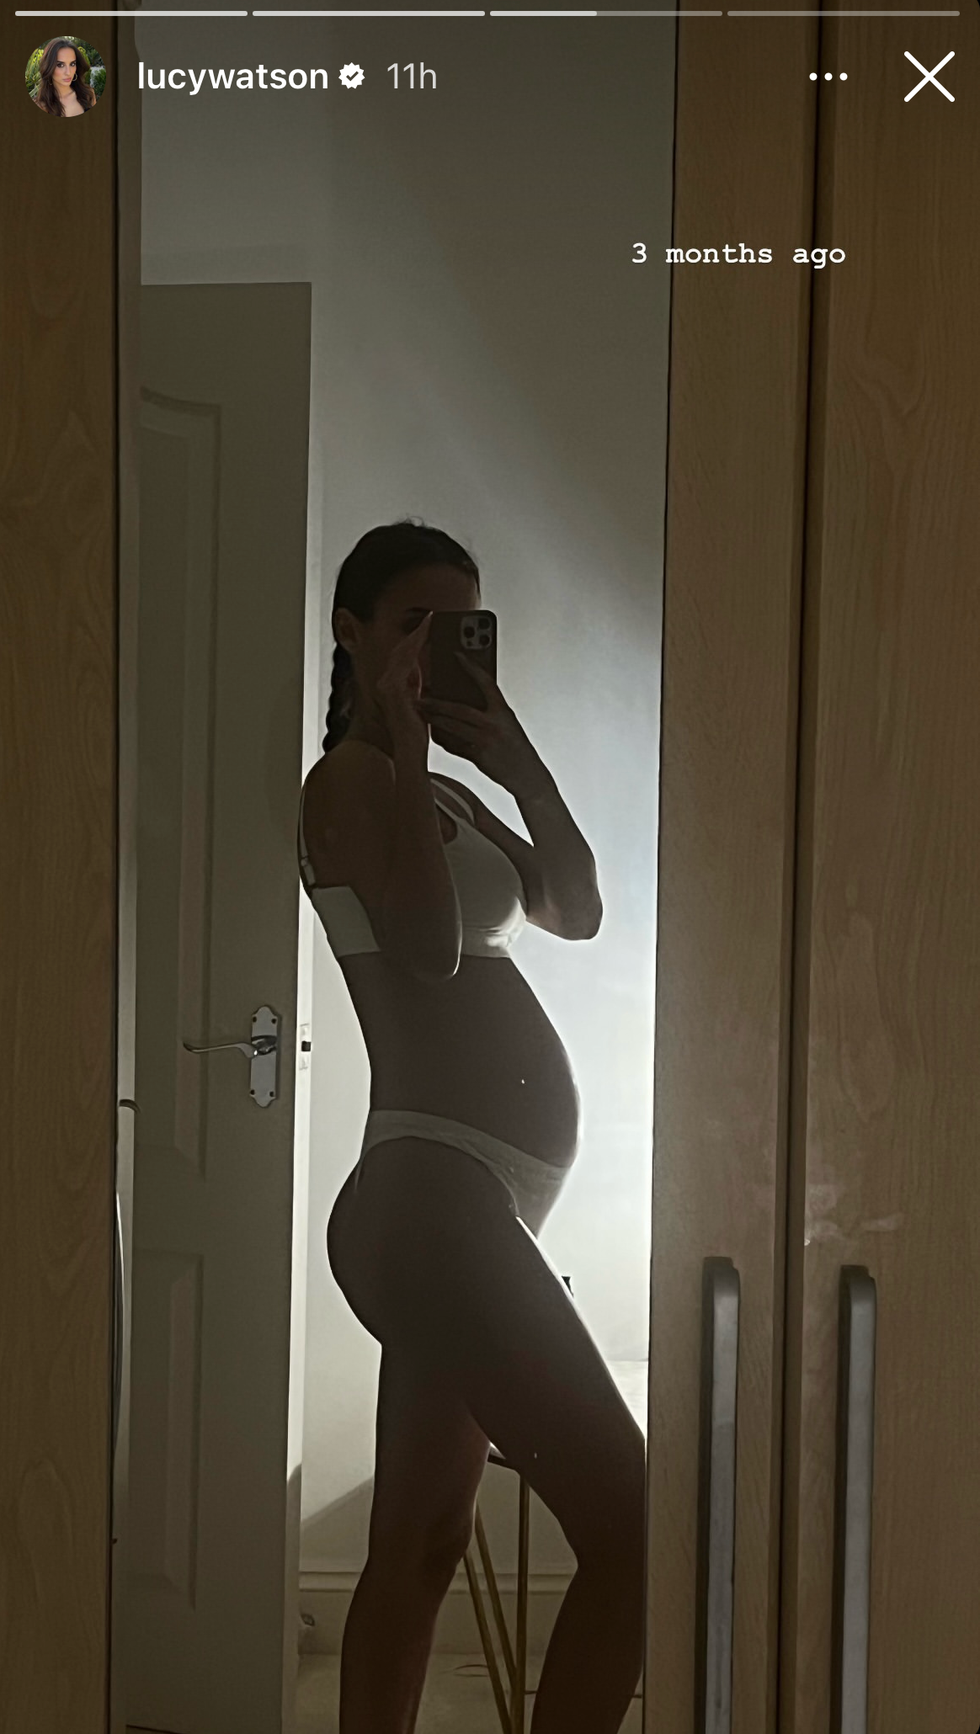 lucy watson takes mirror selfie in her underwear, with her baby bump visible